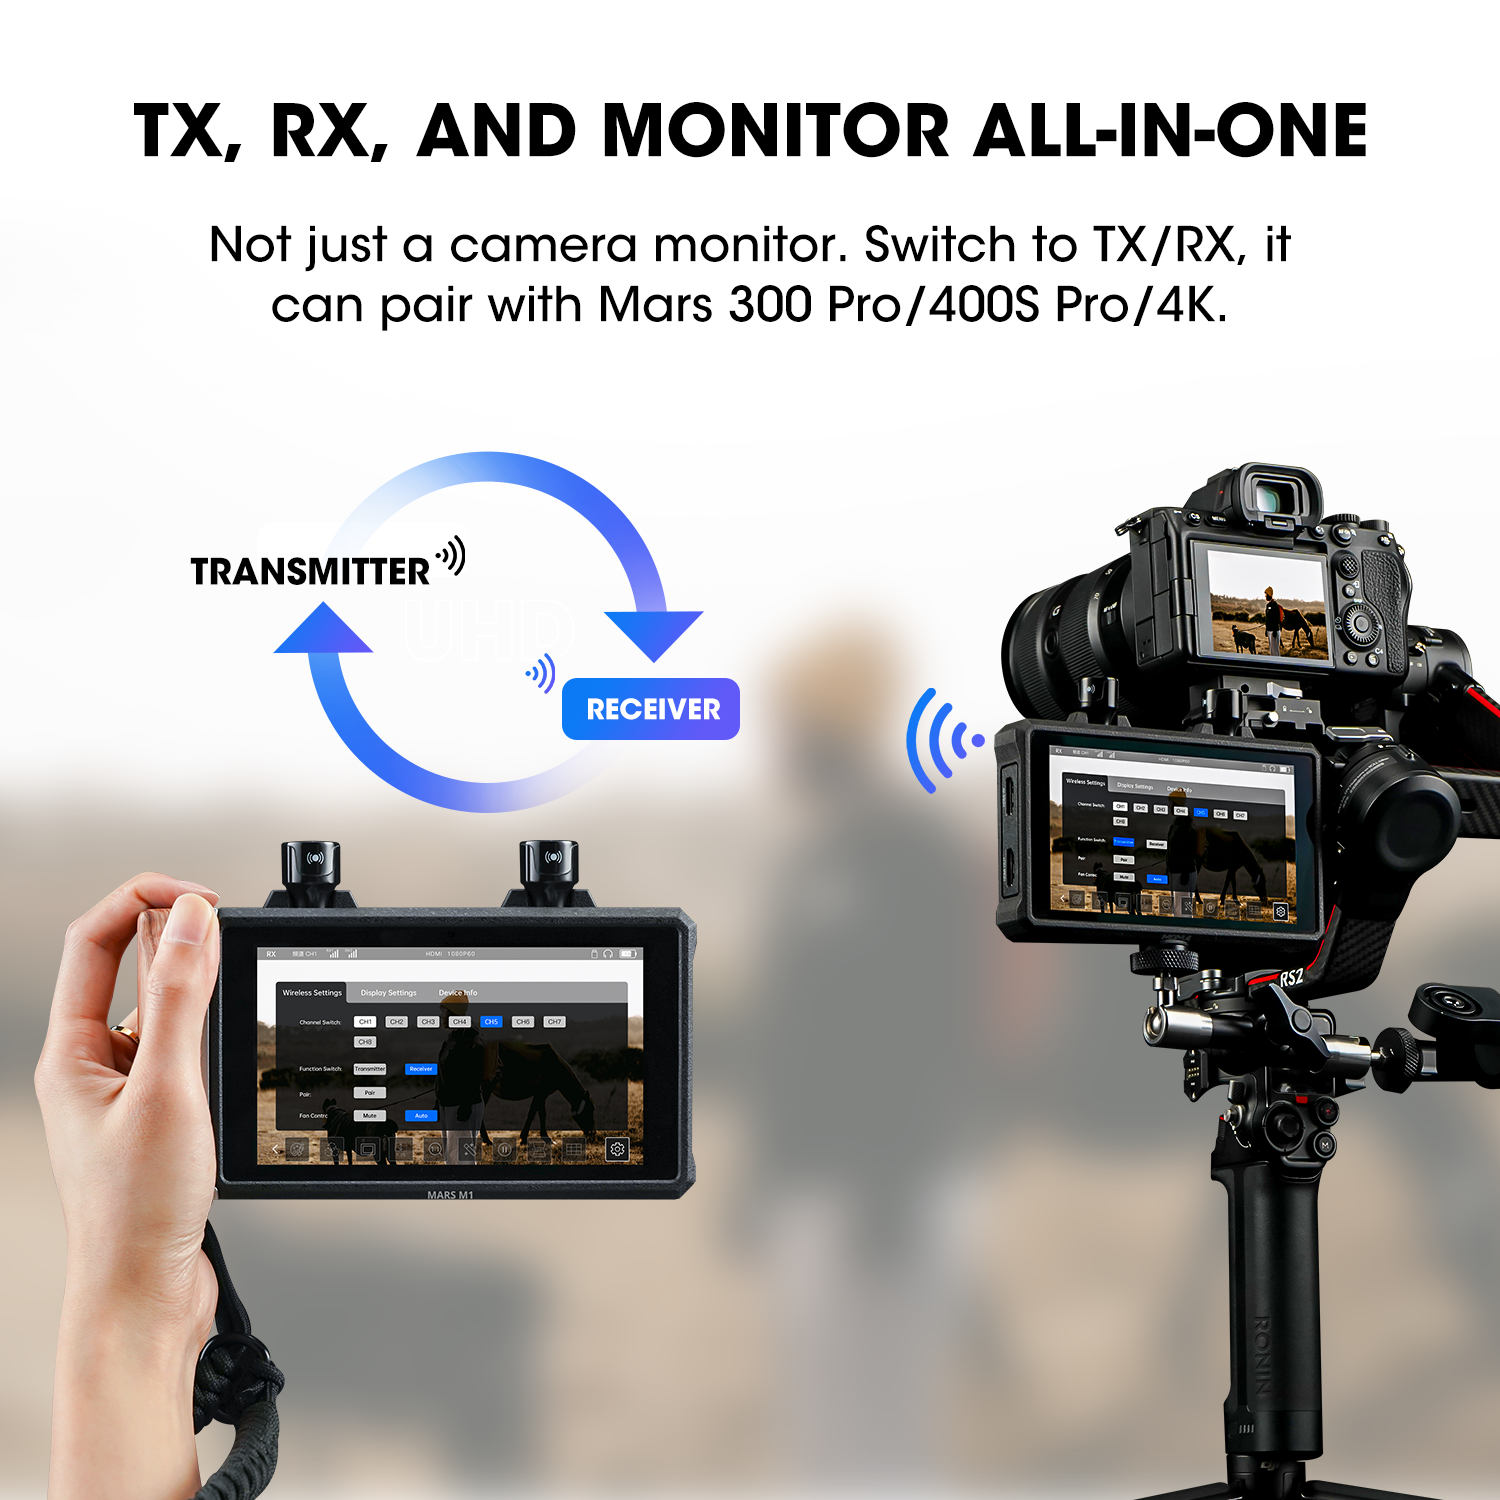 tx rx and monitor in one